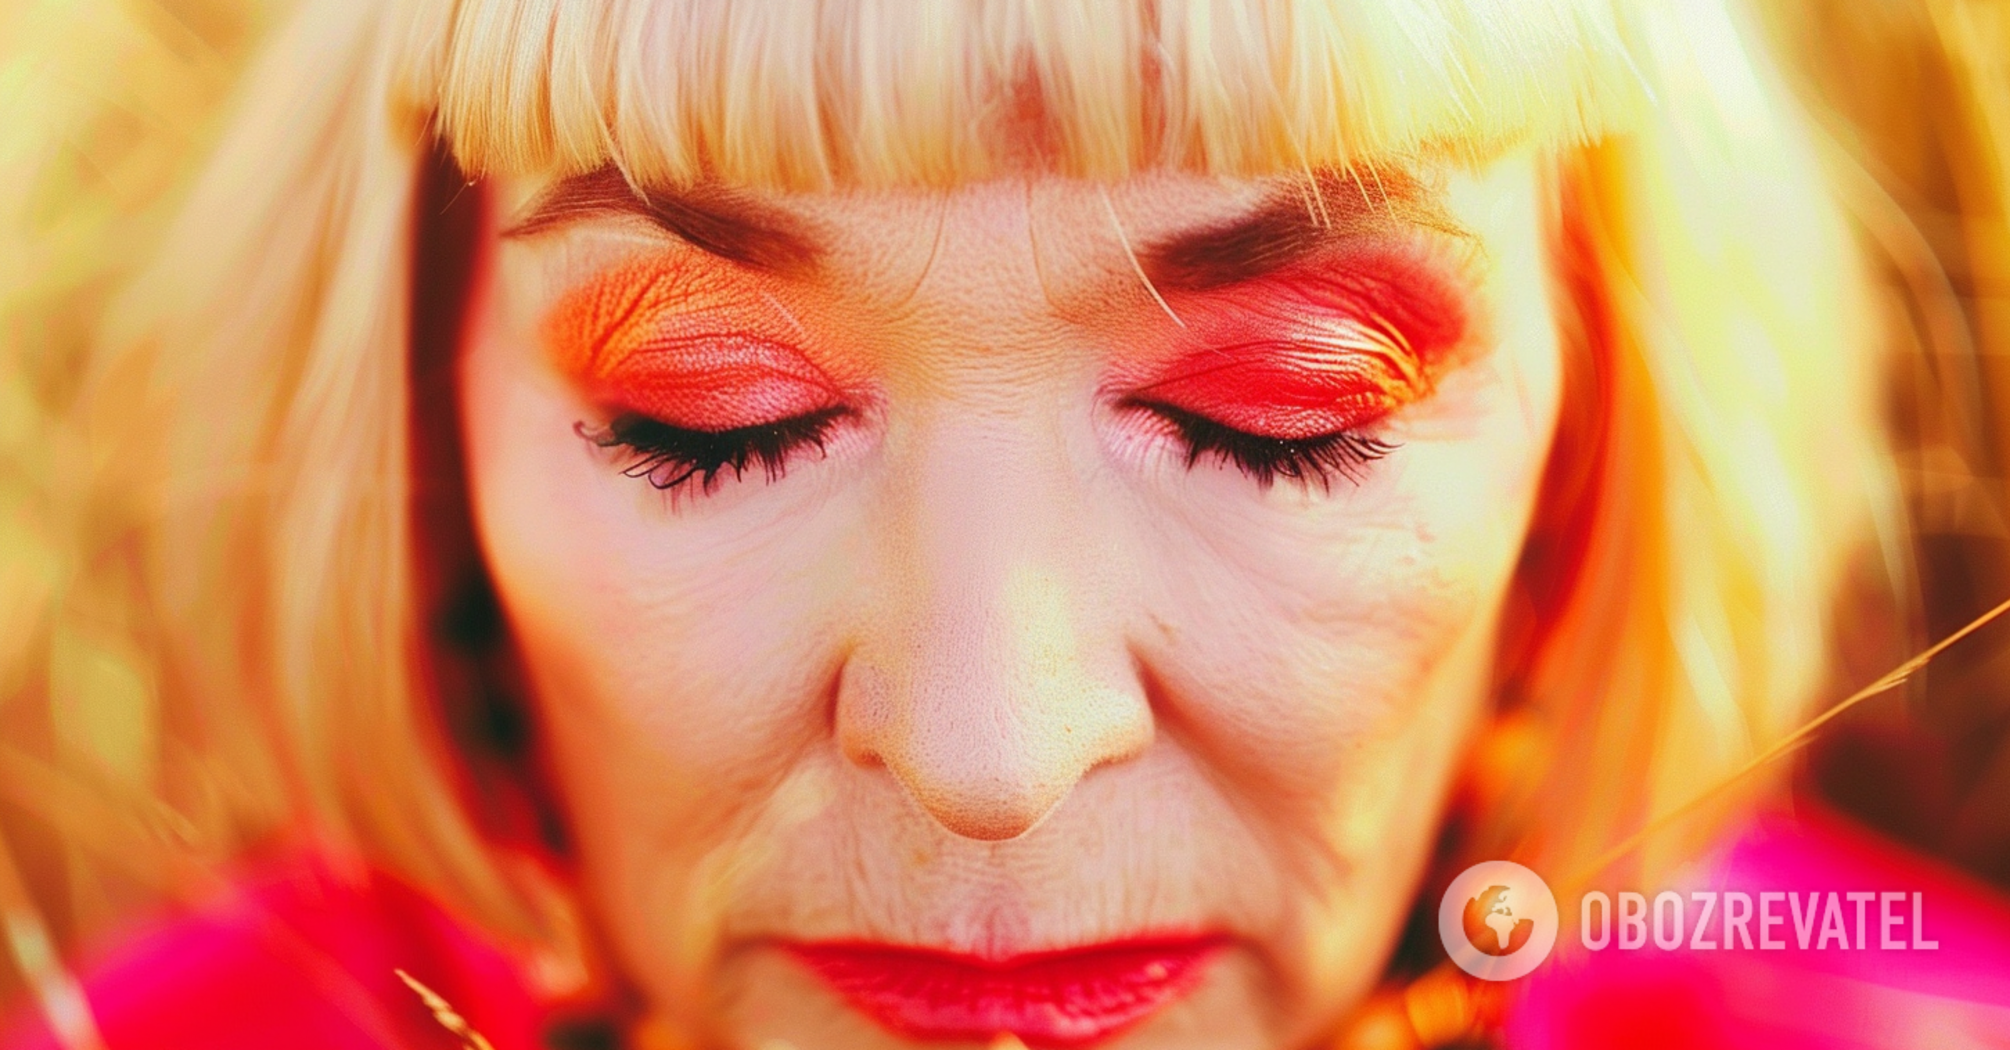 How to change your makeup according to your age: tricks from professionals